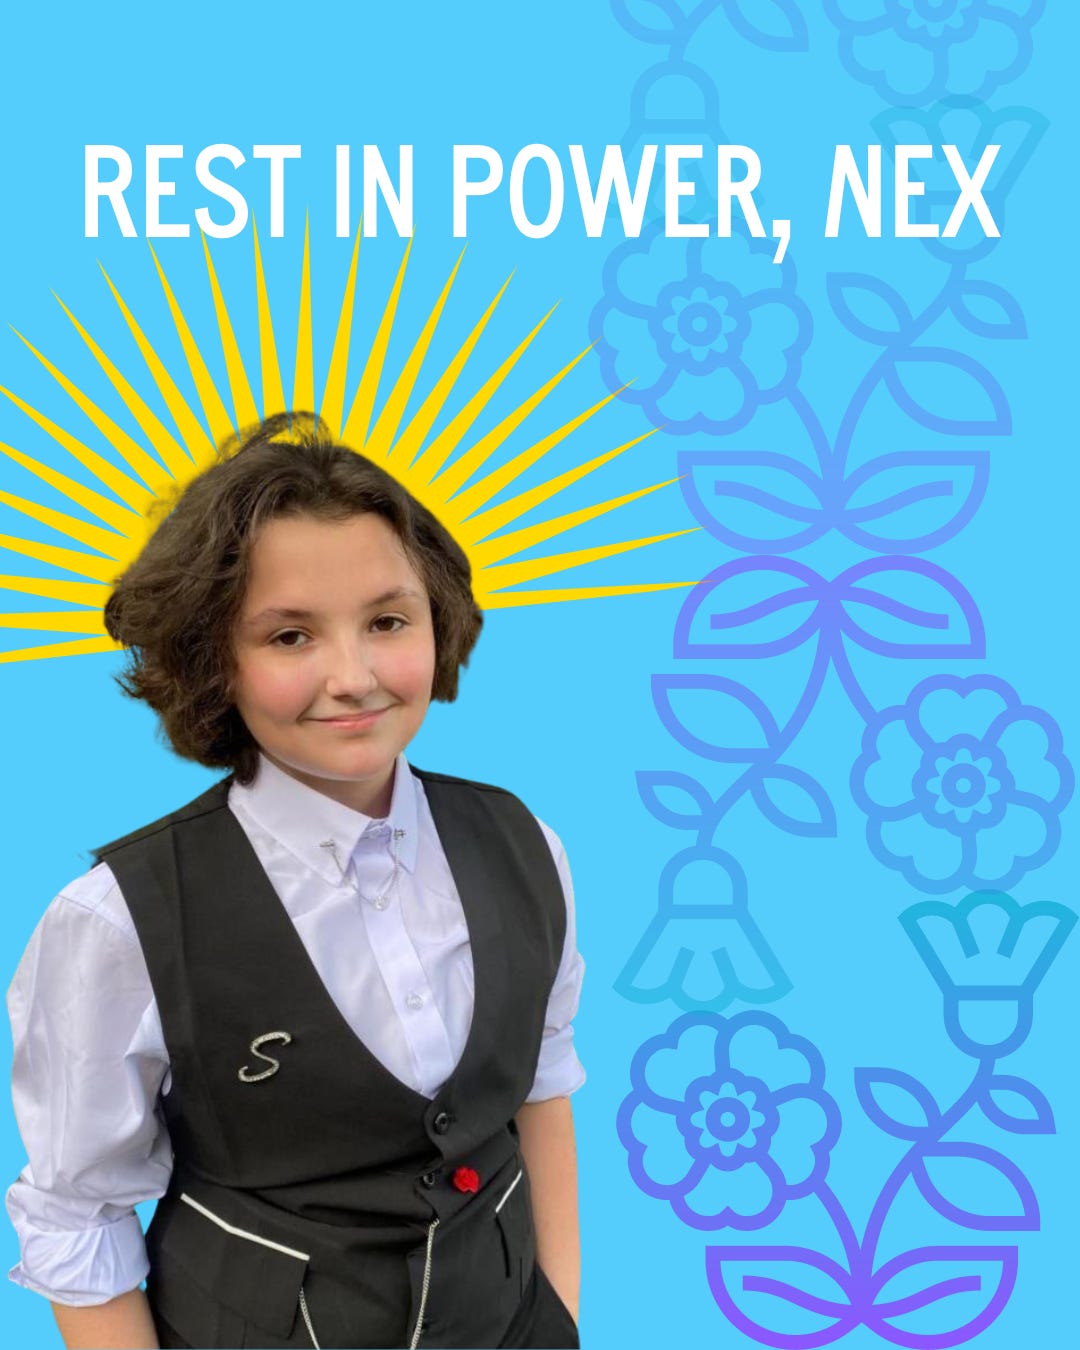 A graphic shows a photo of Nex wearing a dapper button-up shirt and vest, their hair cut to chin-length, and smiling into the camera. Yellow sun rays are illustrated from the crown of their head, with a blue floral illustration along the side. Text overhead reads "Rest in Power, Nex"